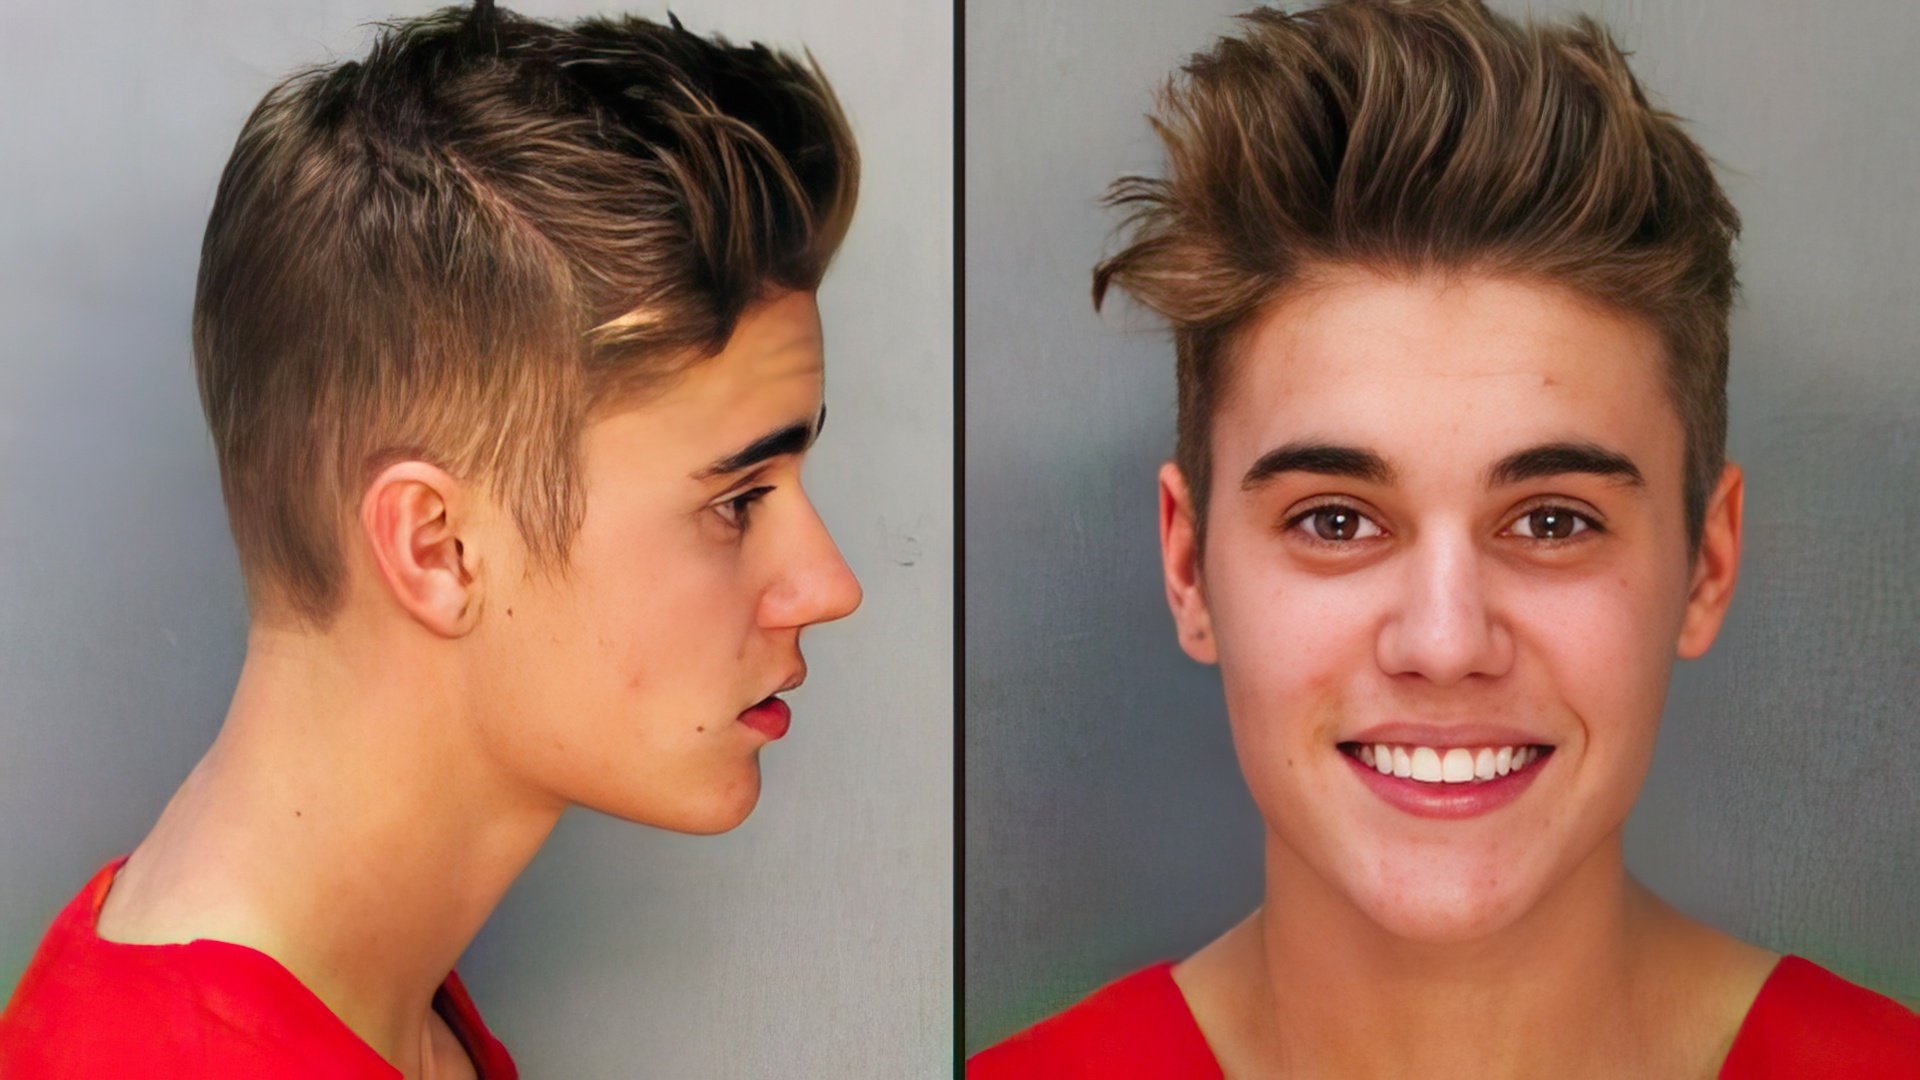 The infamous photo of Justin Bieber post-arrest